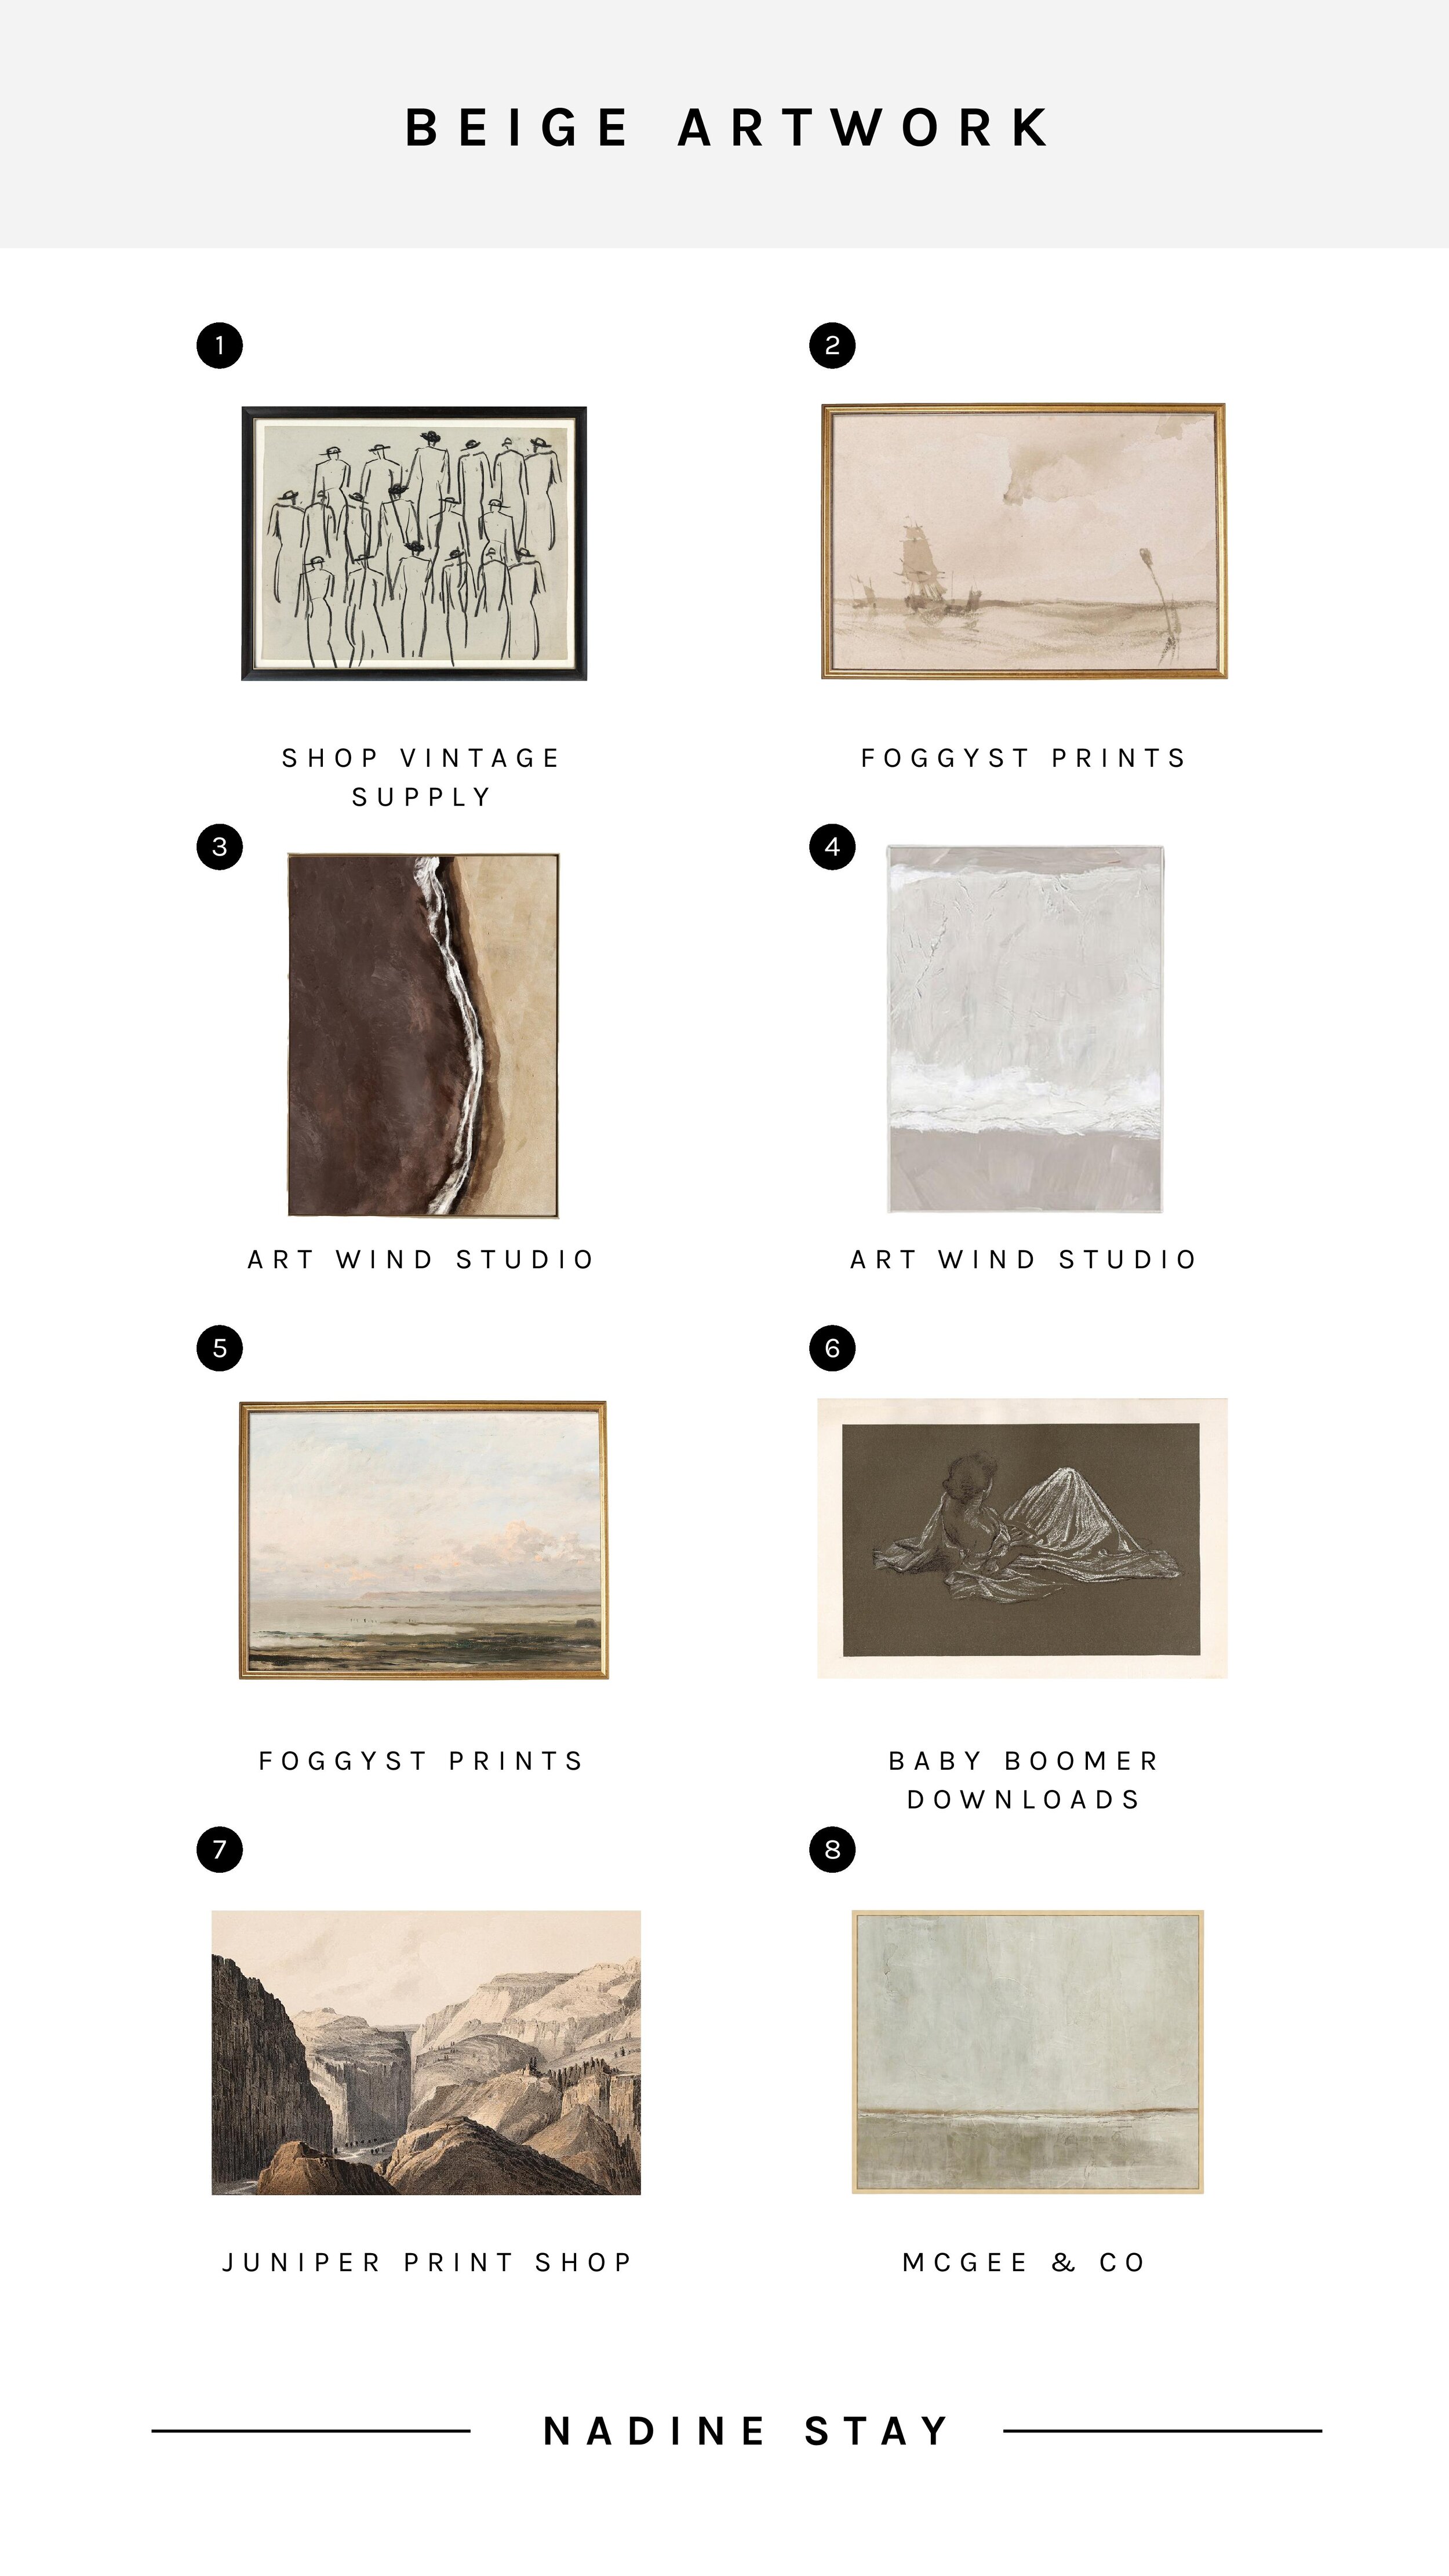 50 Shades of Beige (And 16 Beige Dressers + Artwork) - Beige cabinet inspiration, "dirty white" wall color ideas, and beige accent decor inspiration by Nadine Stay